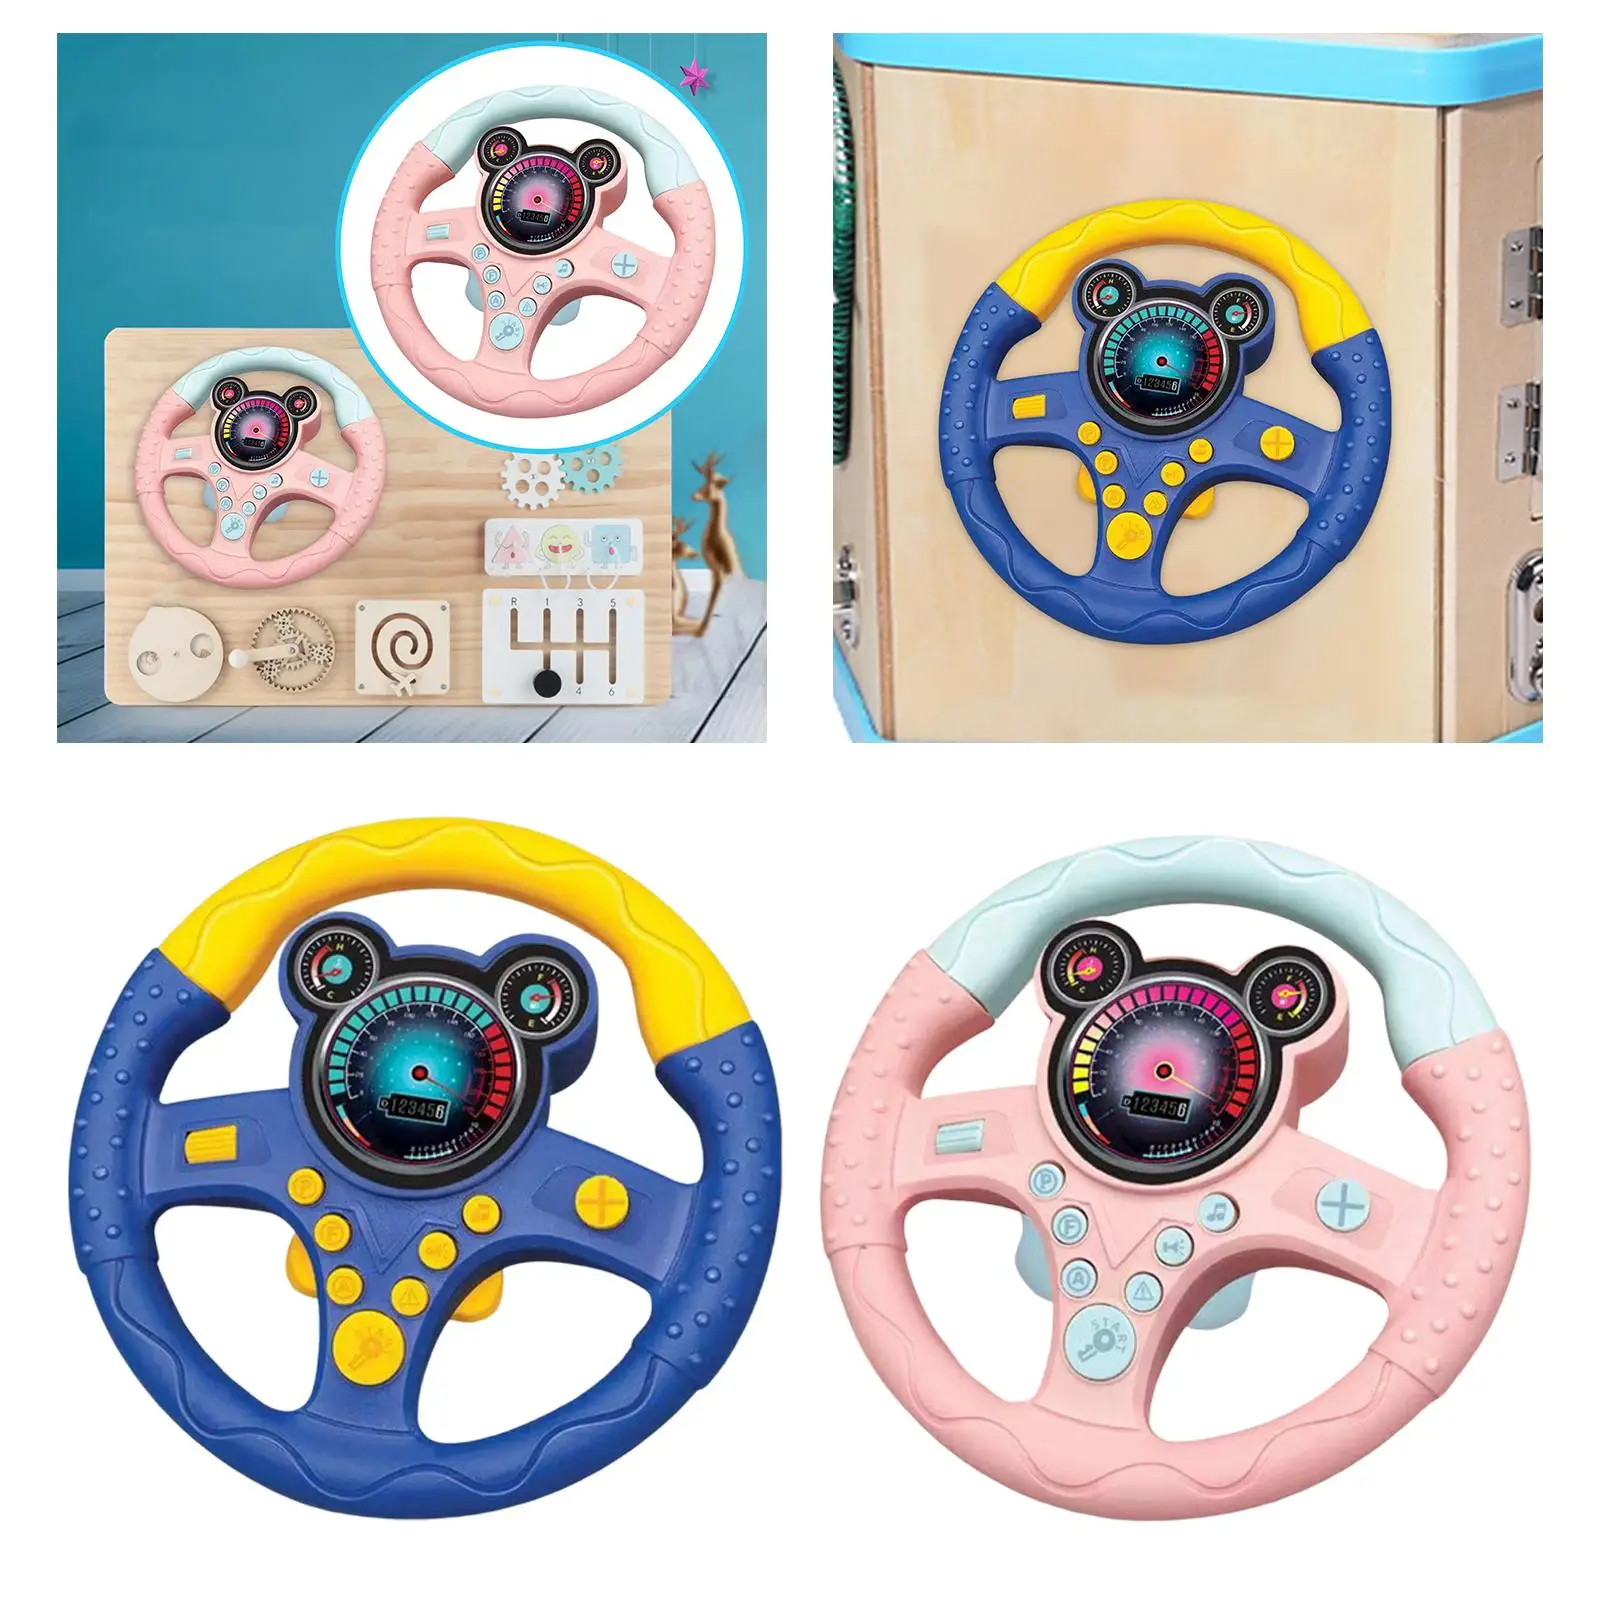 Simulated Steering Wheel Pretend Play Driving Toy Busy Board DIY Accessory for Treehouse Busy Board Backyard Birthday Gifts